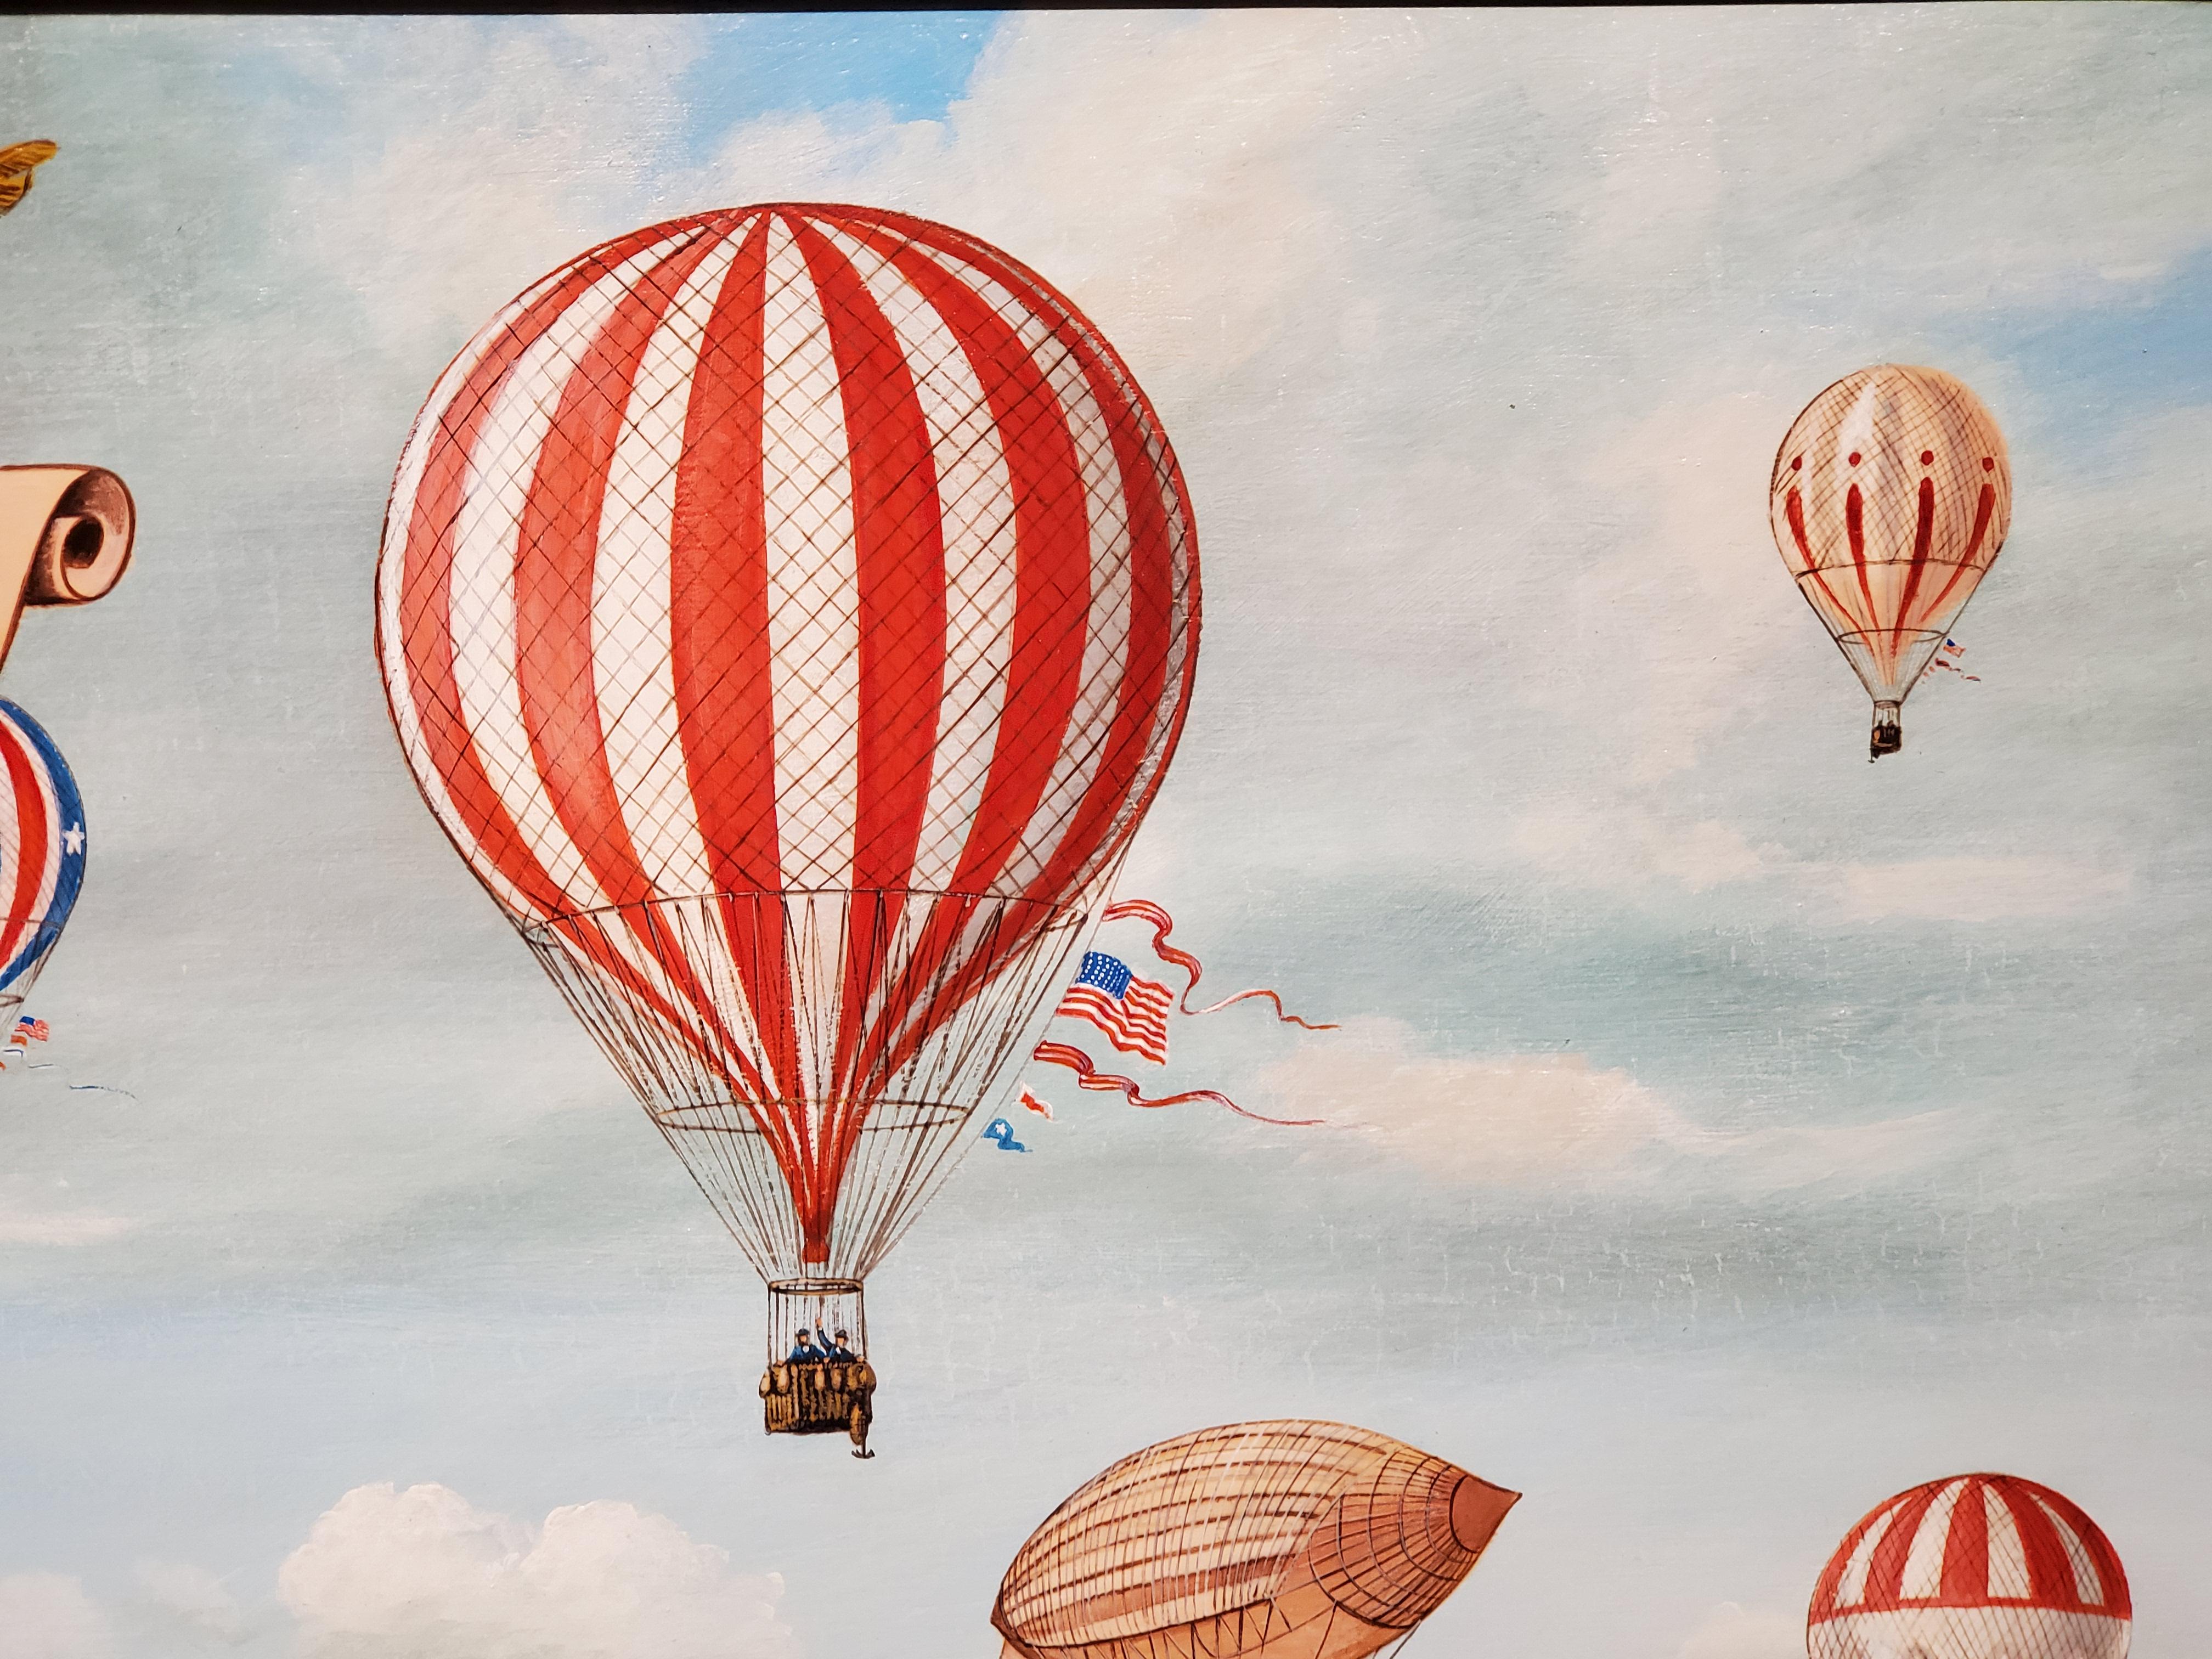 Grand 19th century Aeronautical Spectacular Over the US Capitol by Morris Flight 12